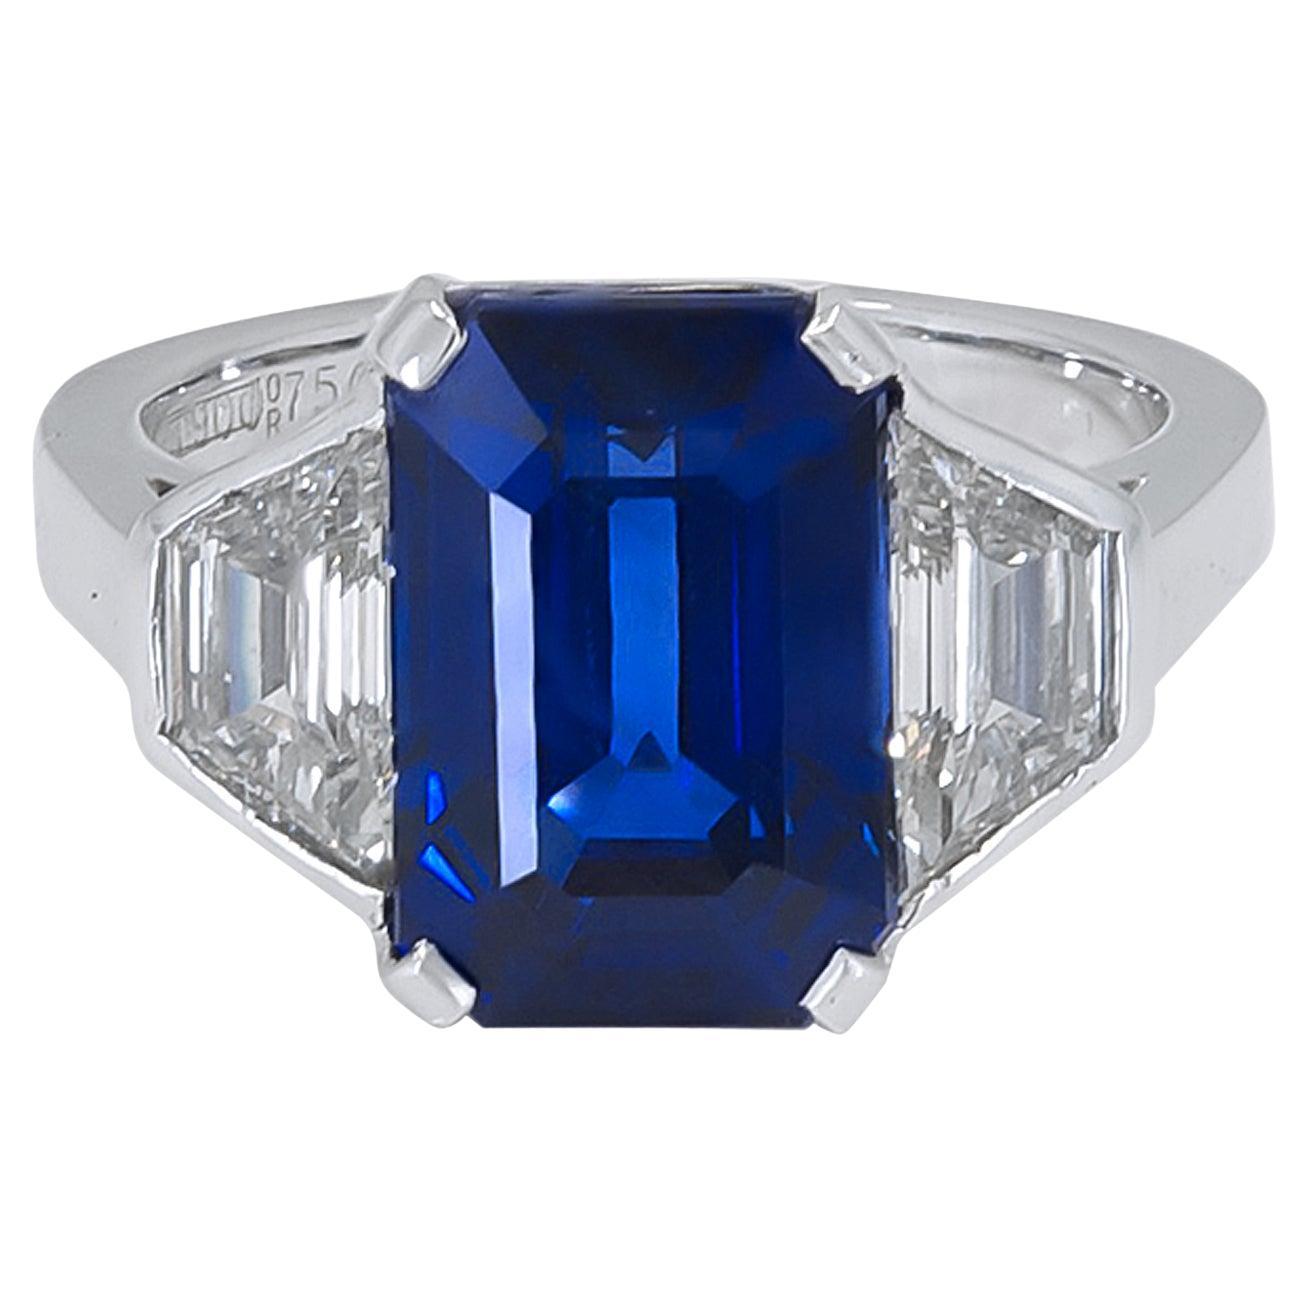 Bulgari 6.40 Carat GRS Certified Sapphire Cocktail Ring in 18K White Gold For Sale